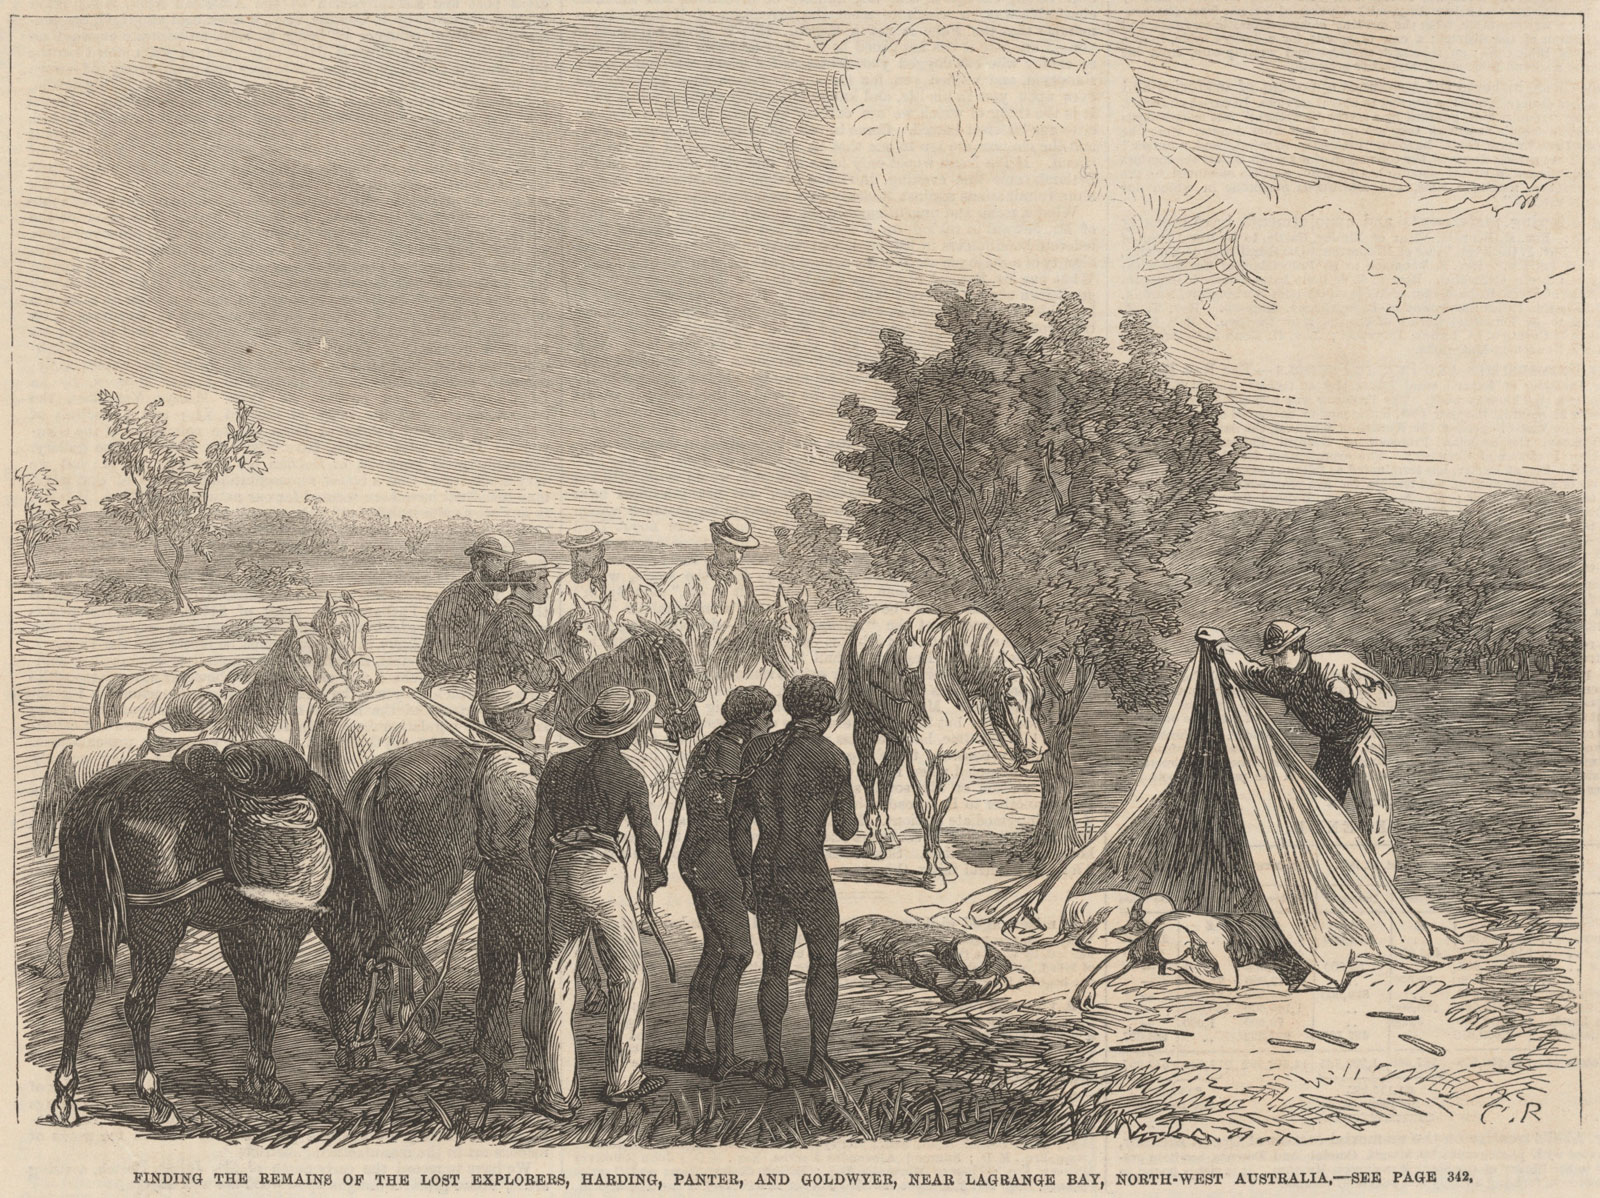 Illustration of the discovery of the bodies of colonial explorers Frederick Panter, James Harding and William Goldwyer, published 1865.